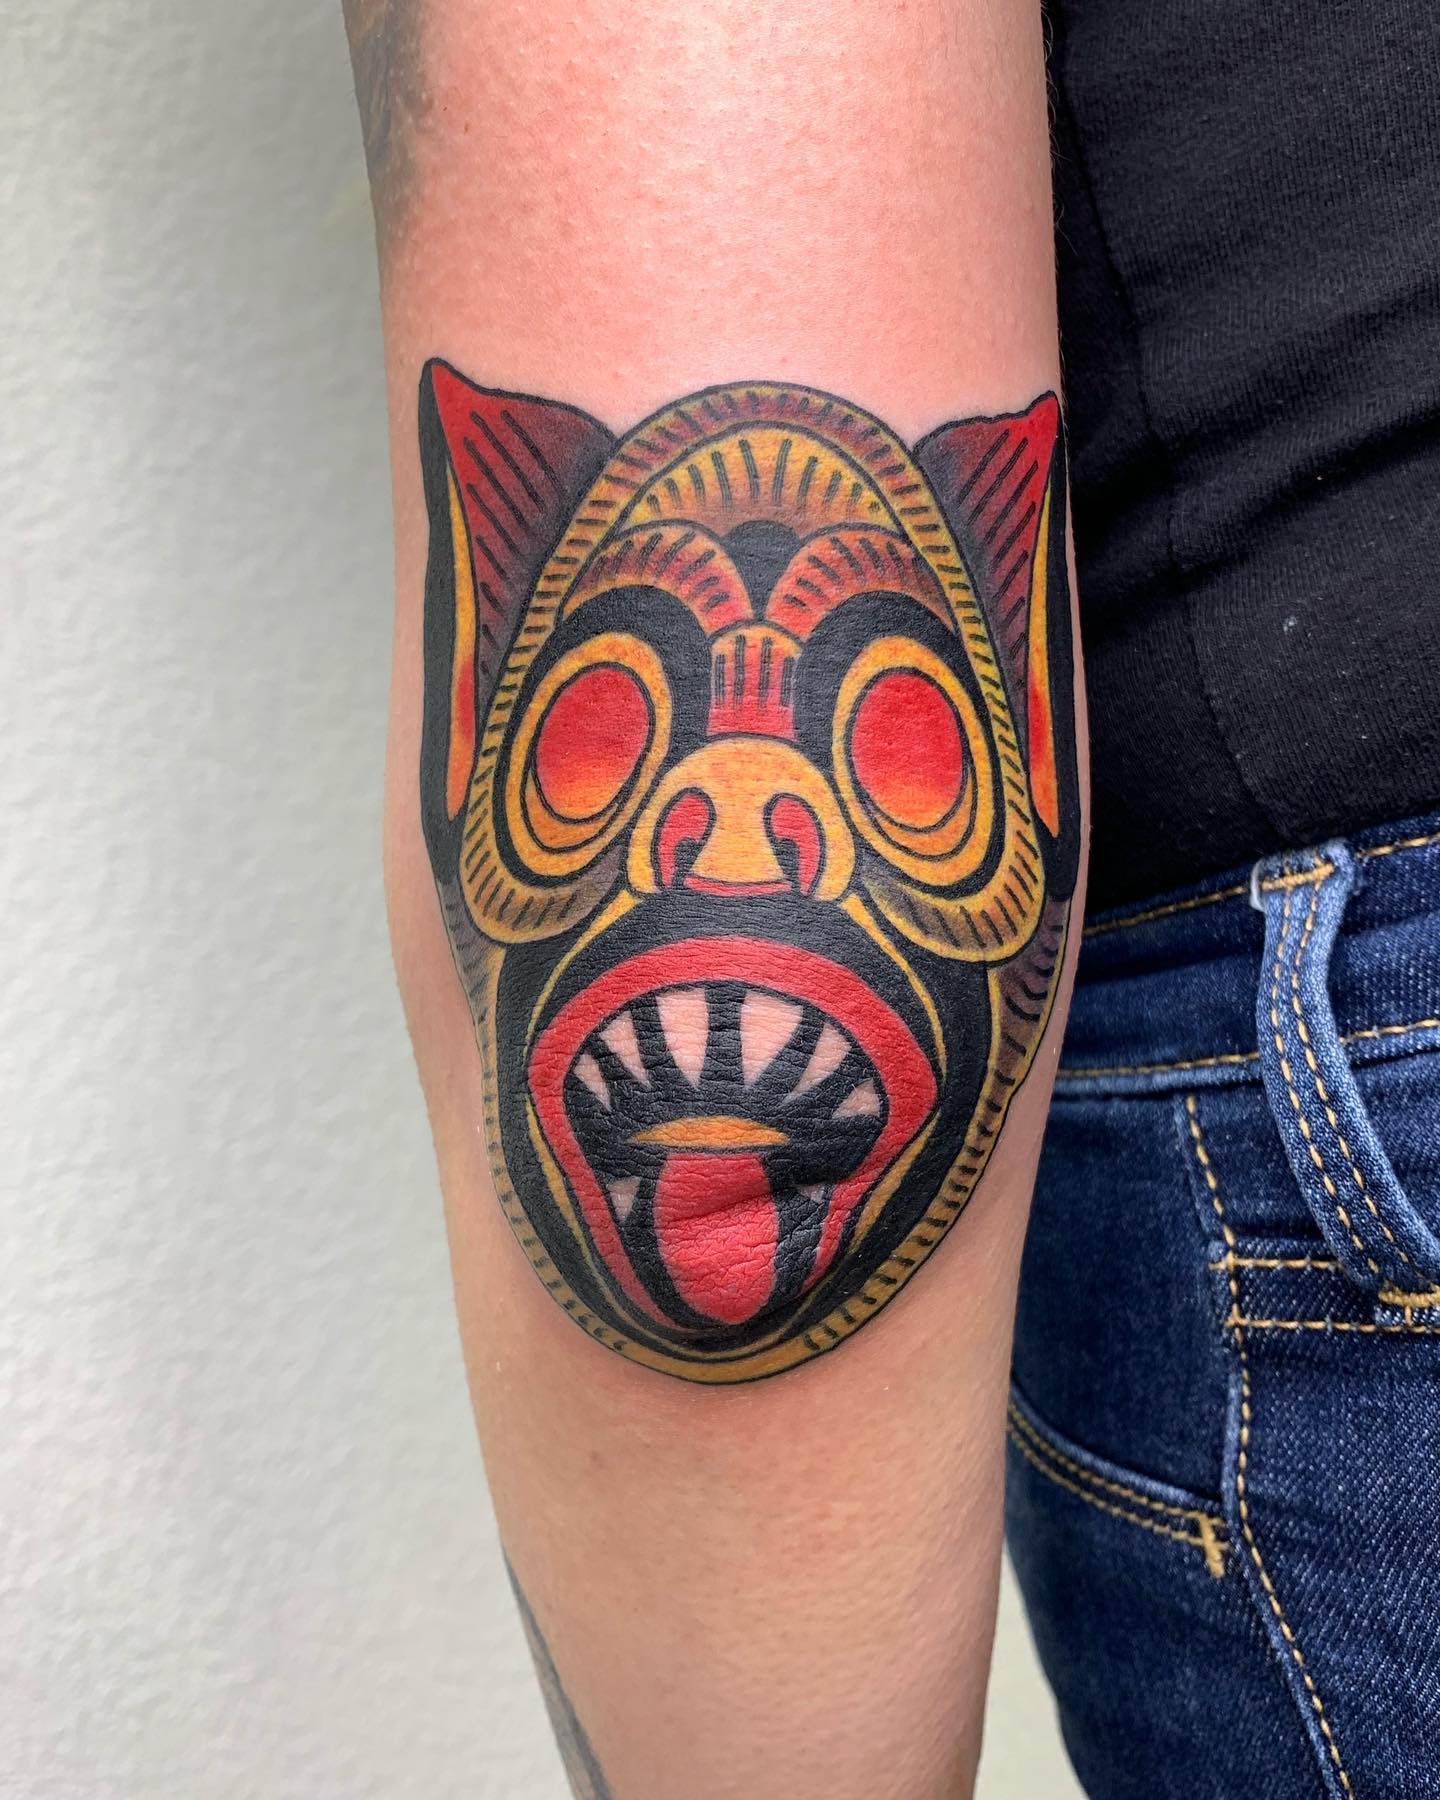 A mask can be a symbol of you trying to hide something or your true identity. If you’ve been struggling with self-image this tattoo will be very accurate of who you are.